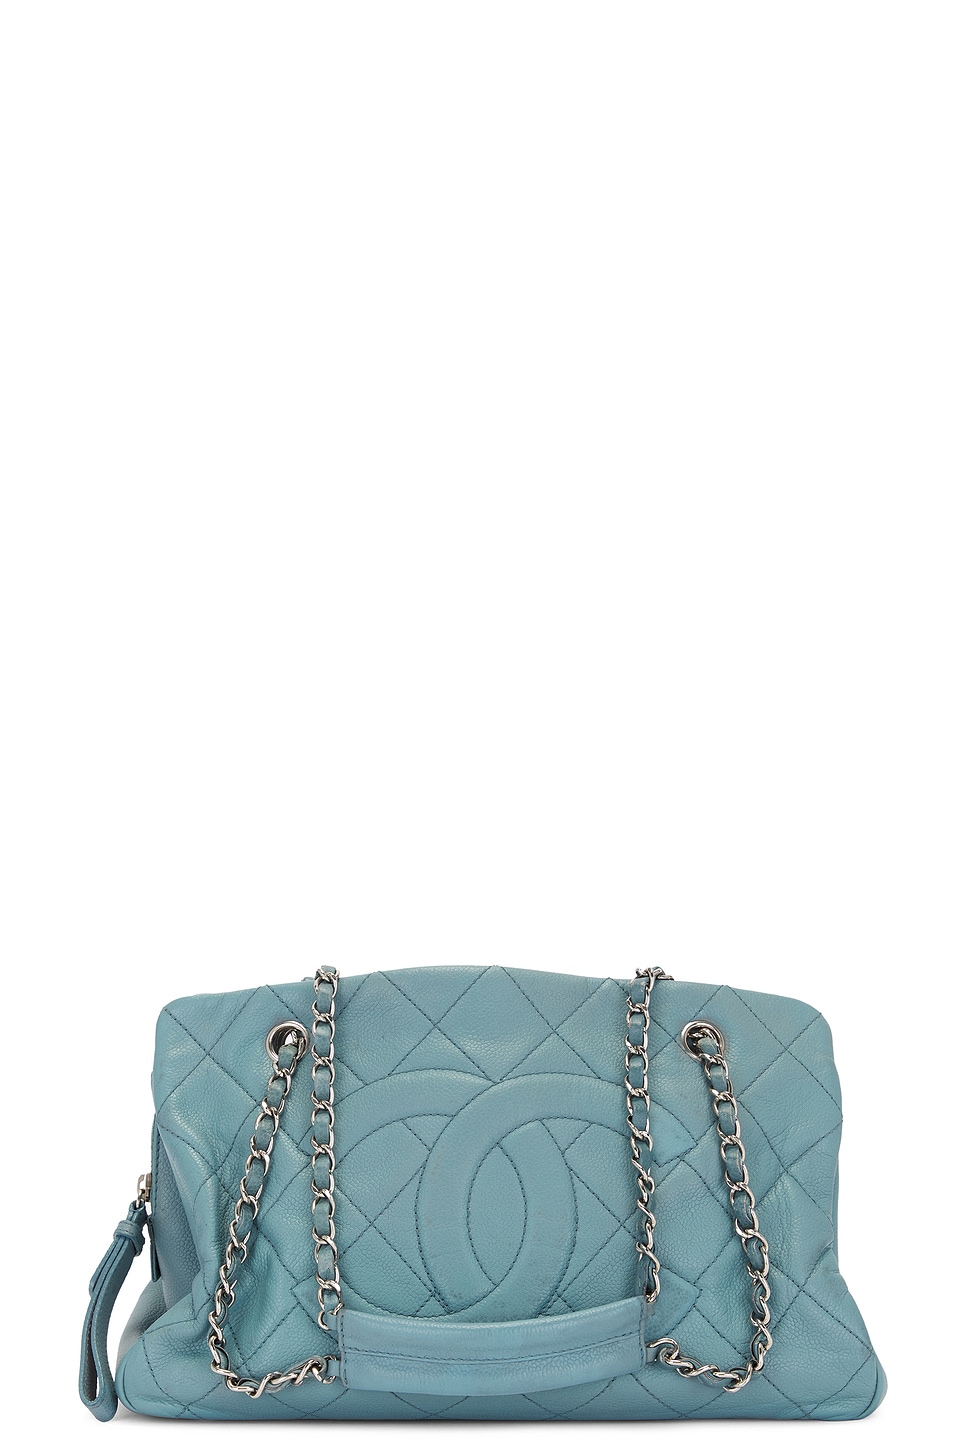 Pre-owned Chanel Matelasse Caviar Chain Shoulder Bag In Blue